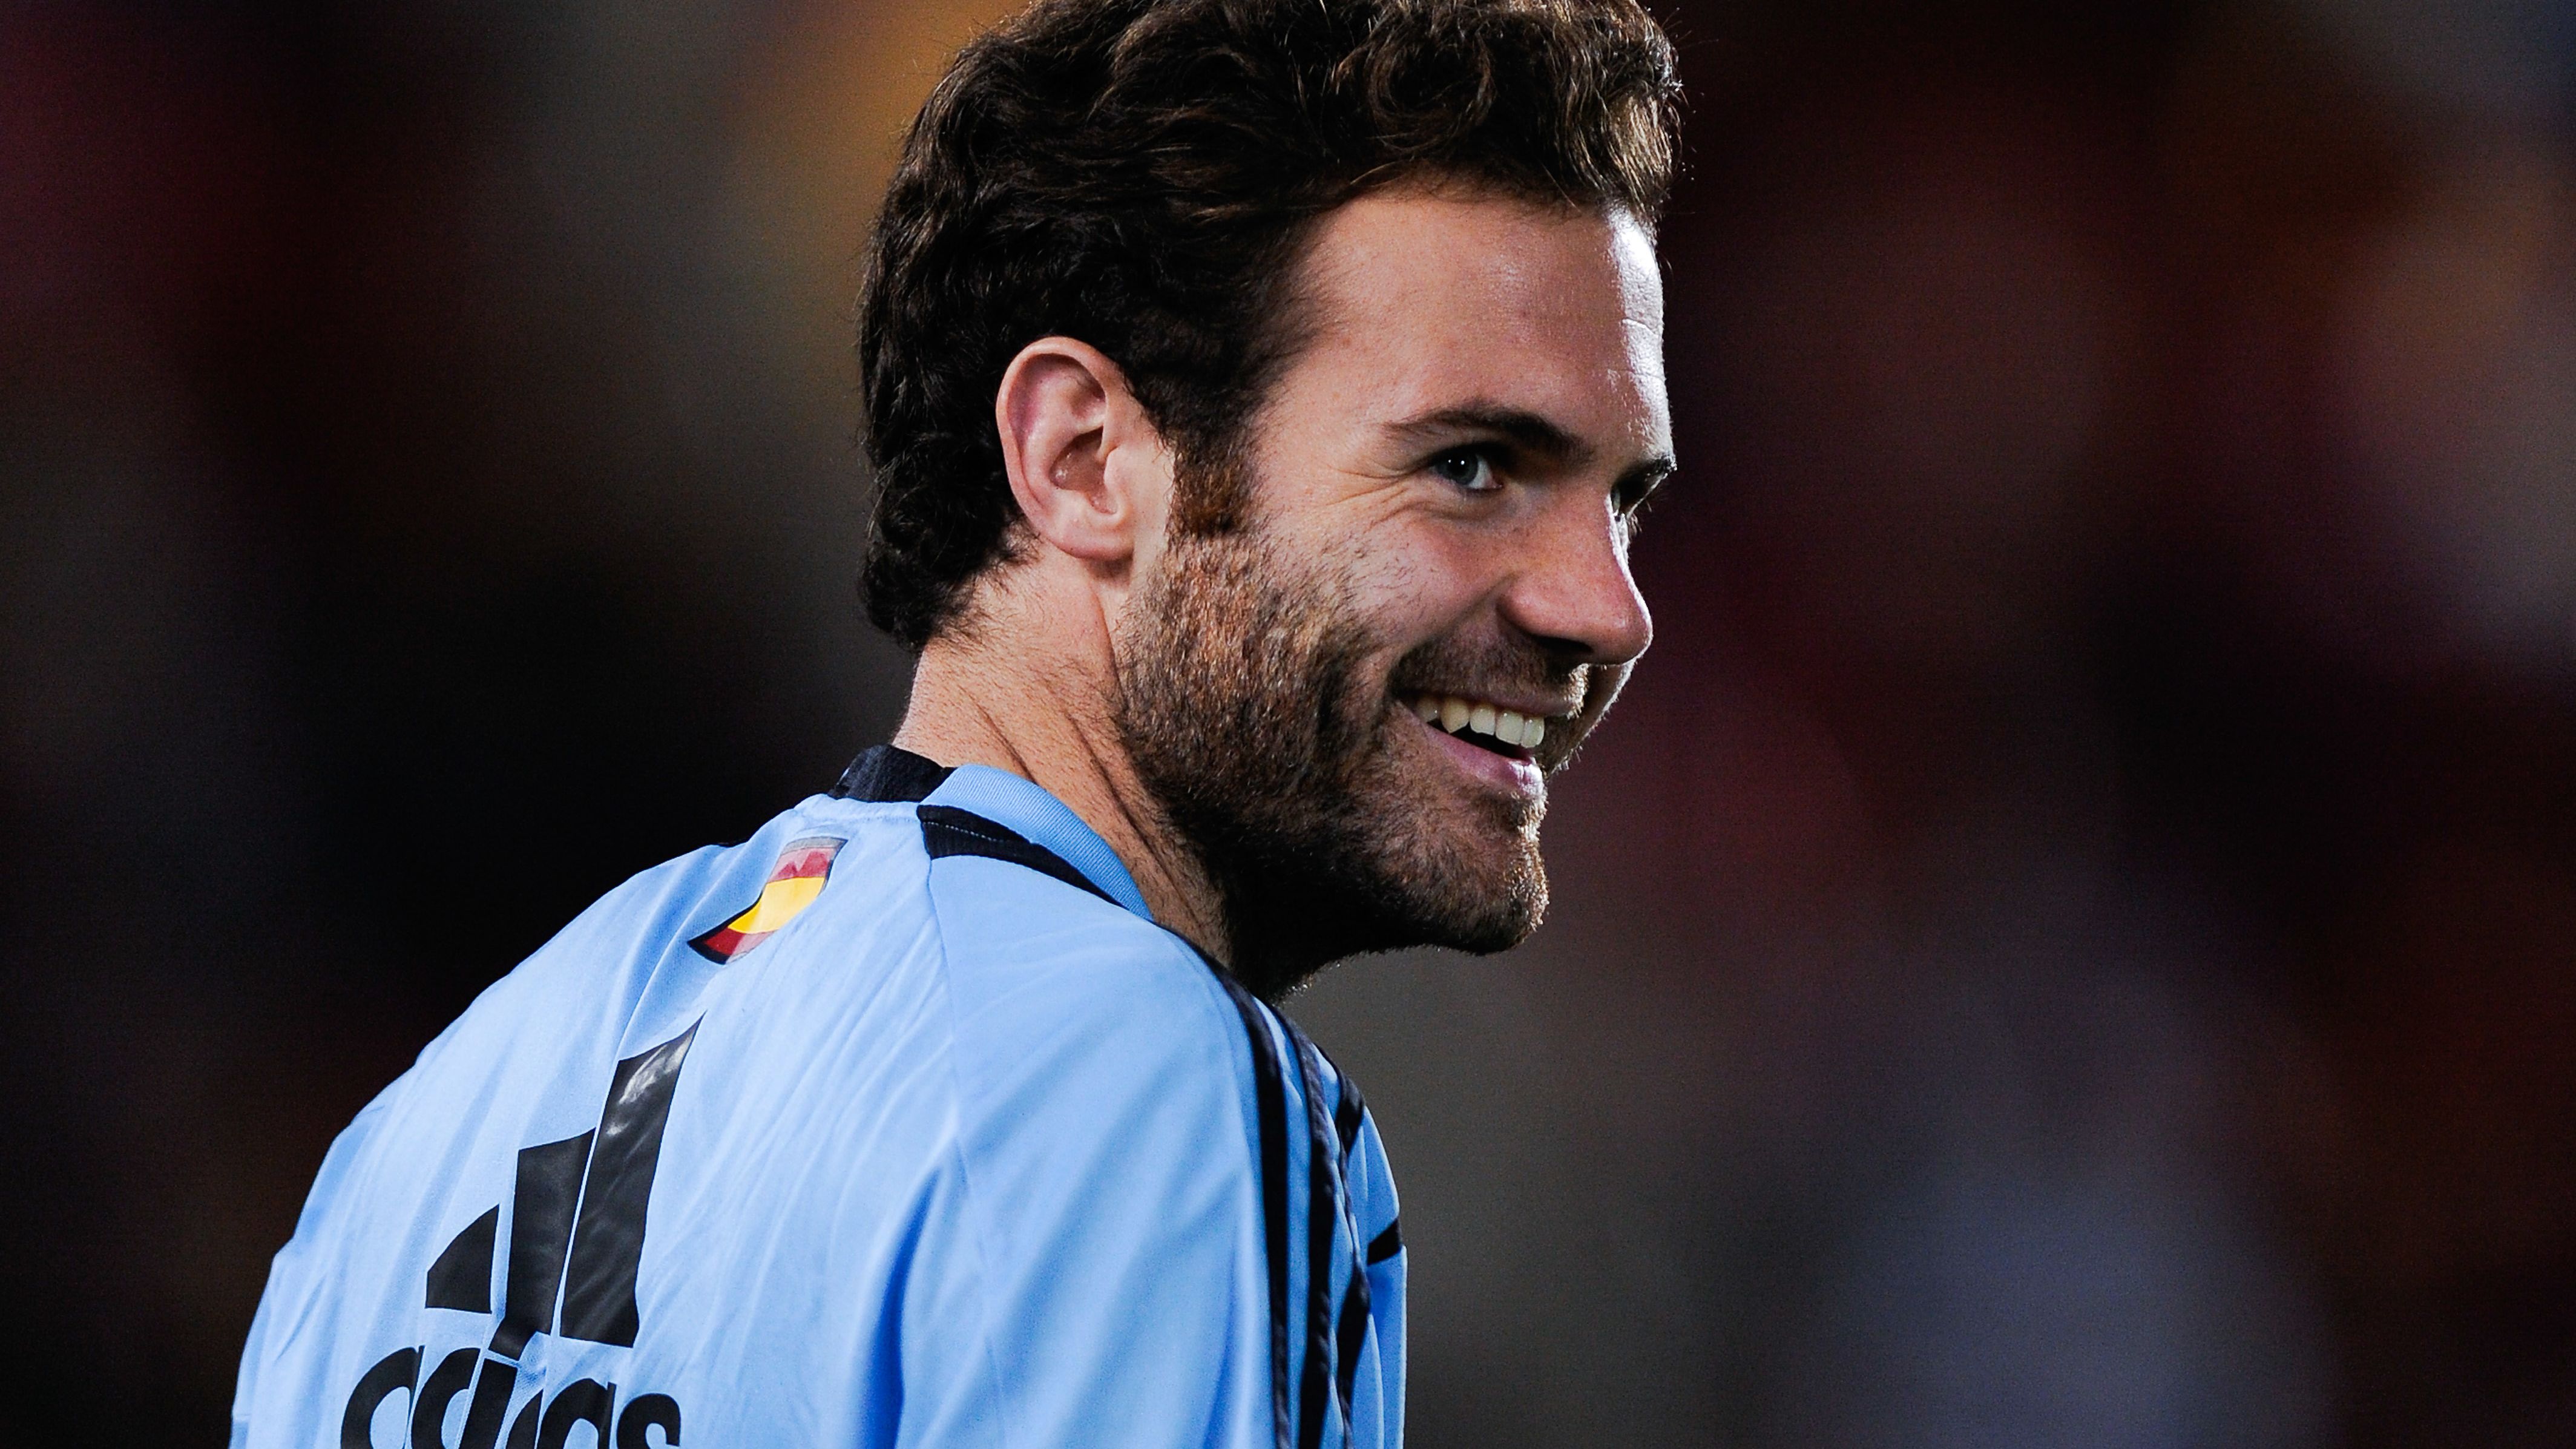 Mata: "I have enjoyed some very happy years at Chelsea but the time has come for a new challenge."